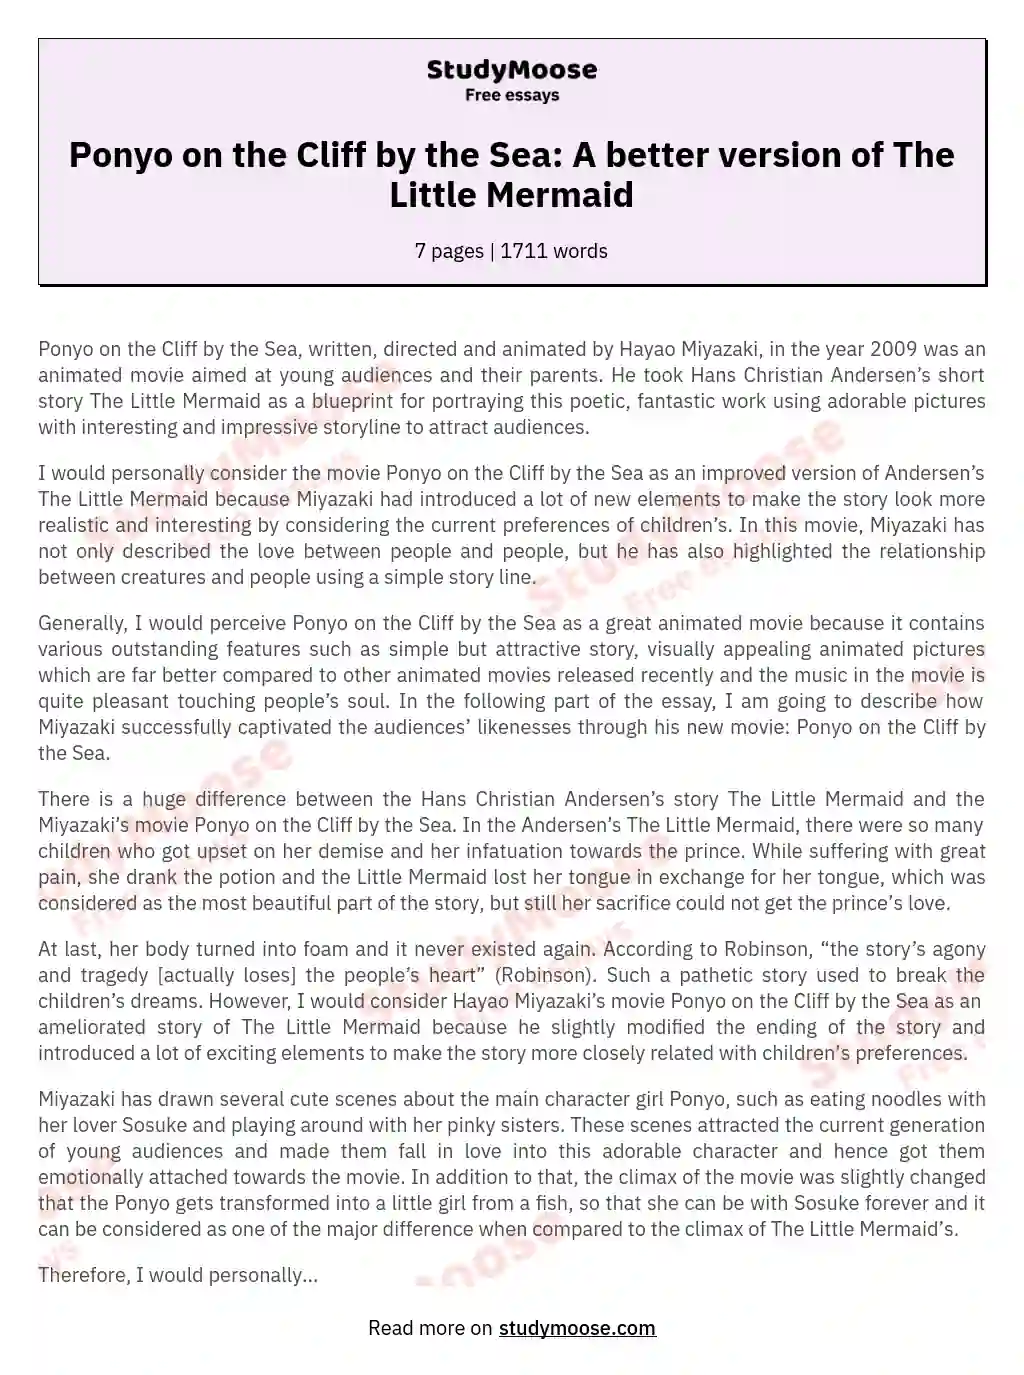 Ponyo on the Cliff by the Sea: A better version of The Little Mermaid essay